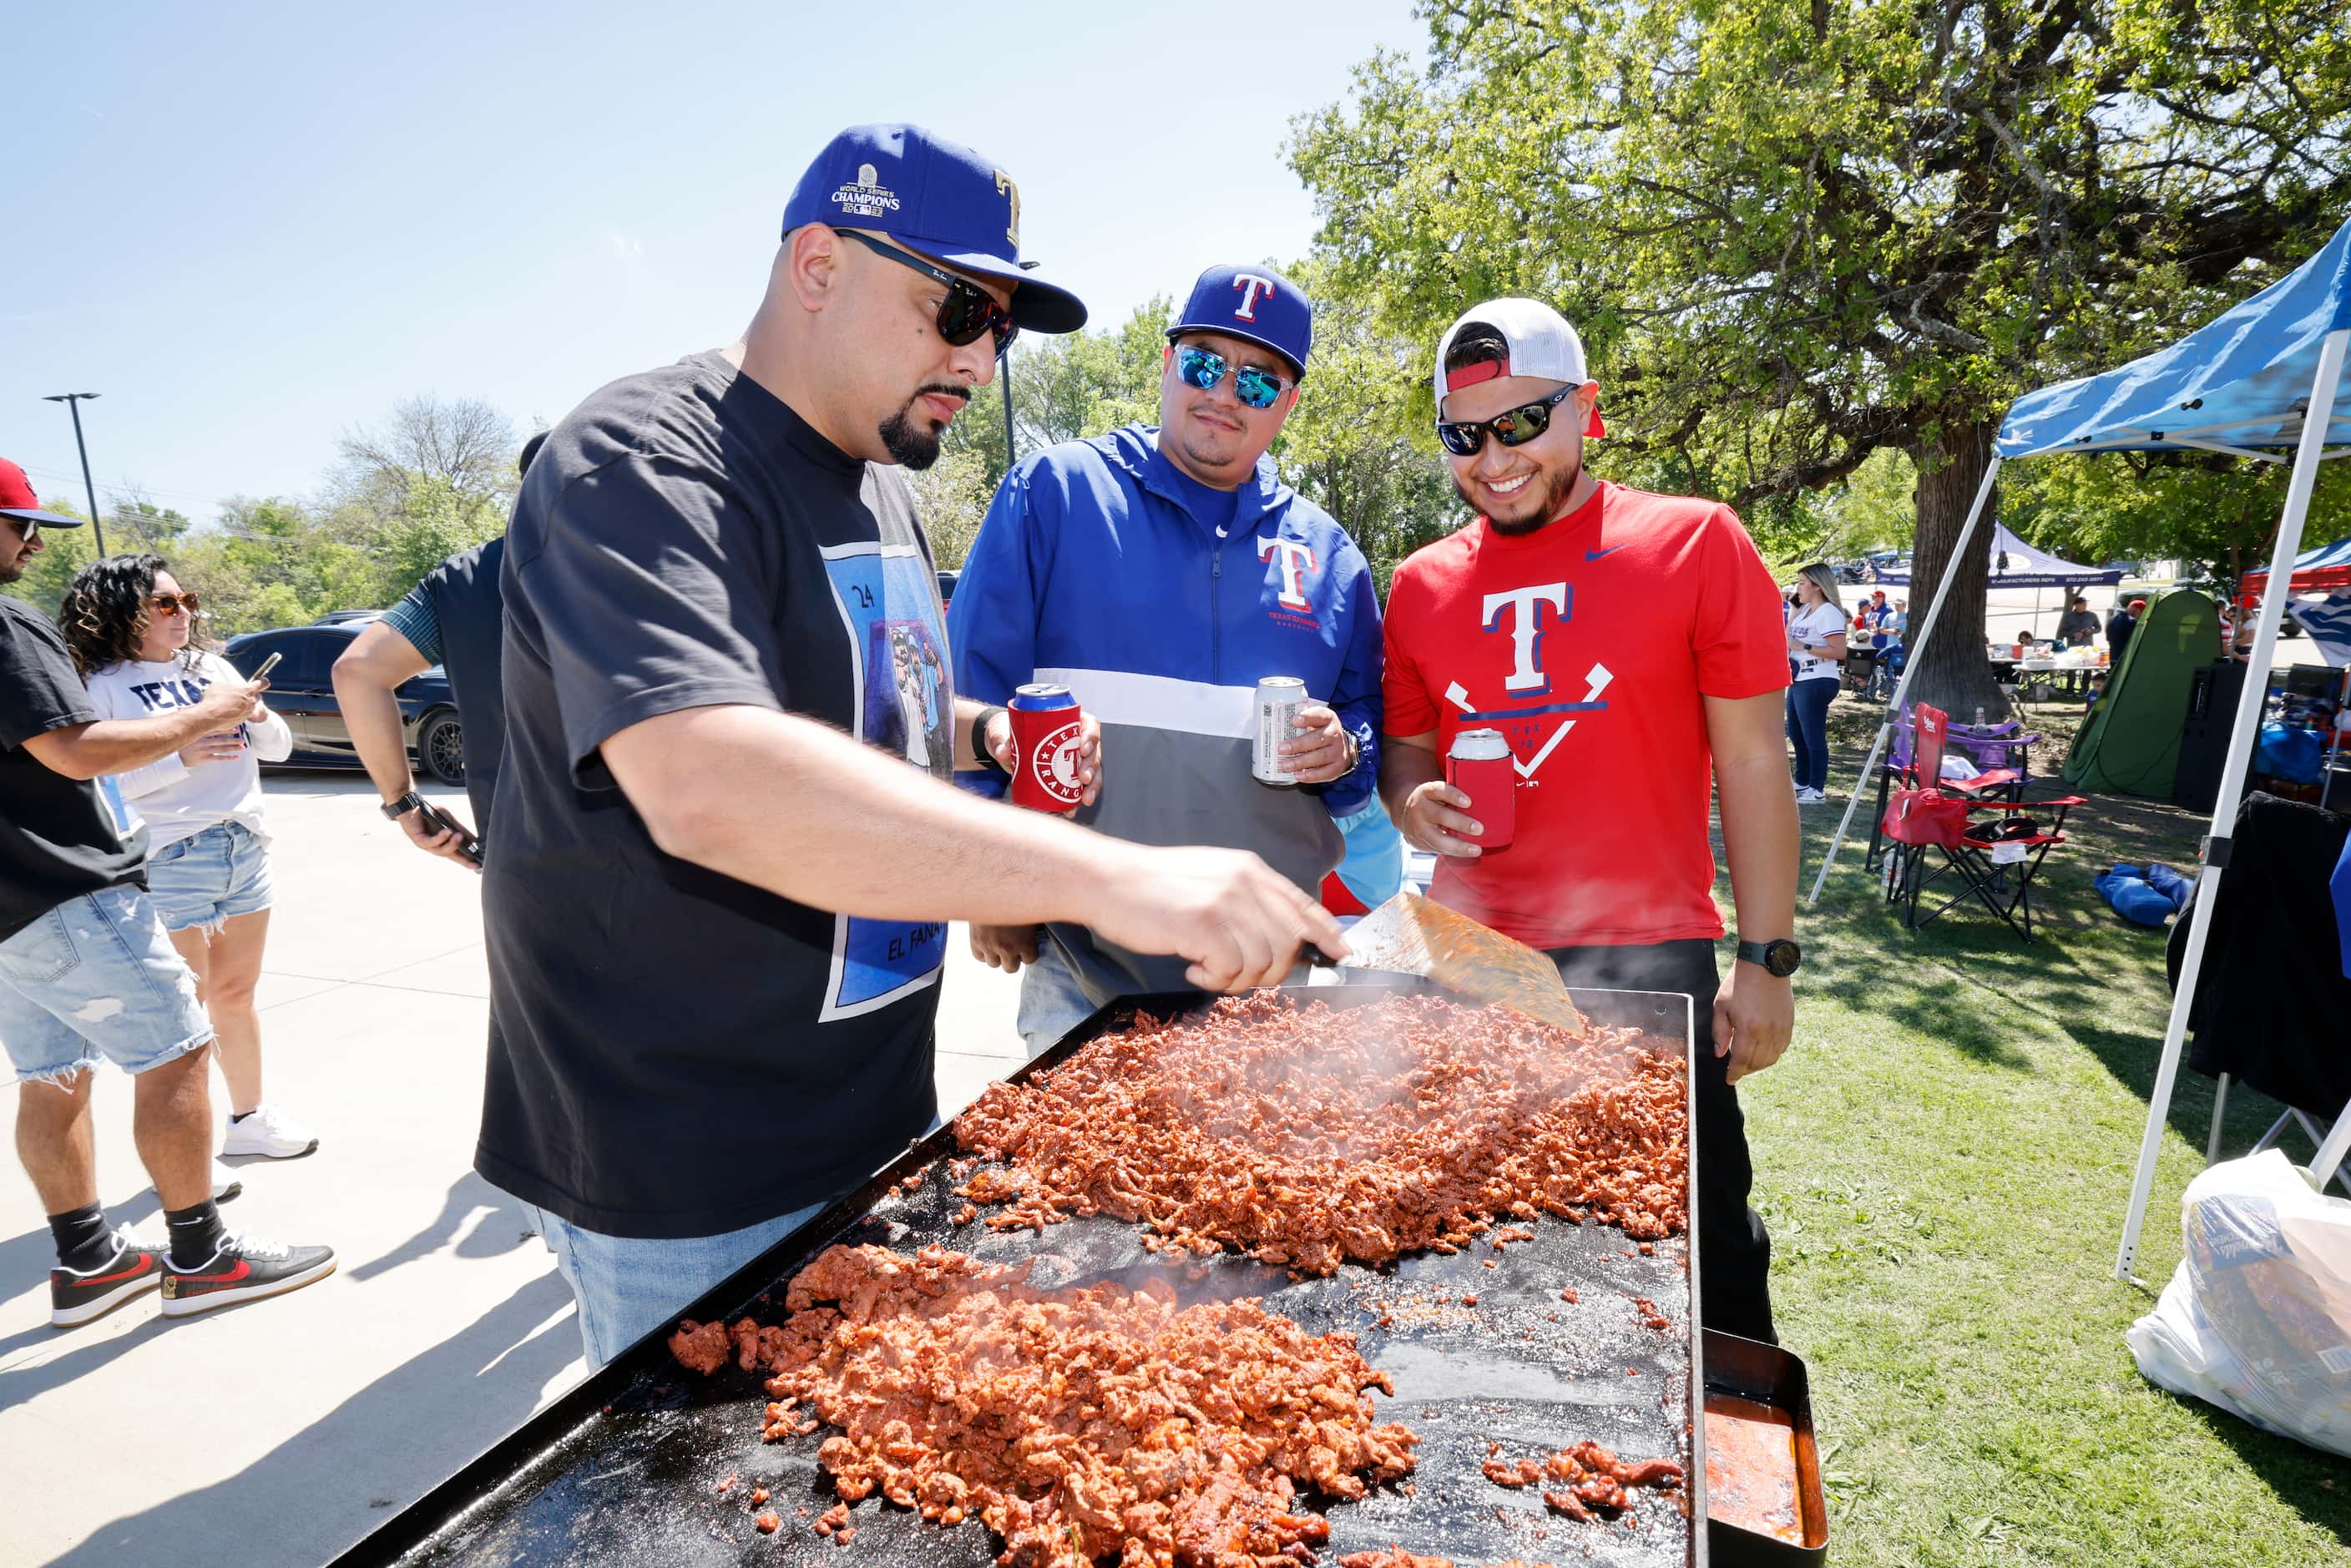 Texas Rangers fans Sergio Erazo of Arlington, from left, cooks while tailgating with his...